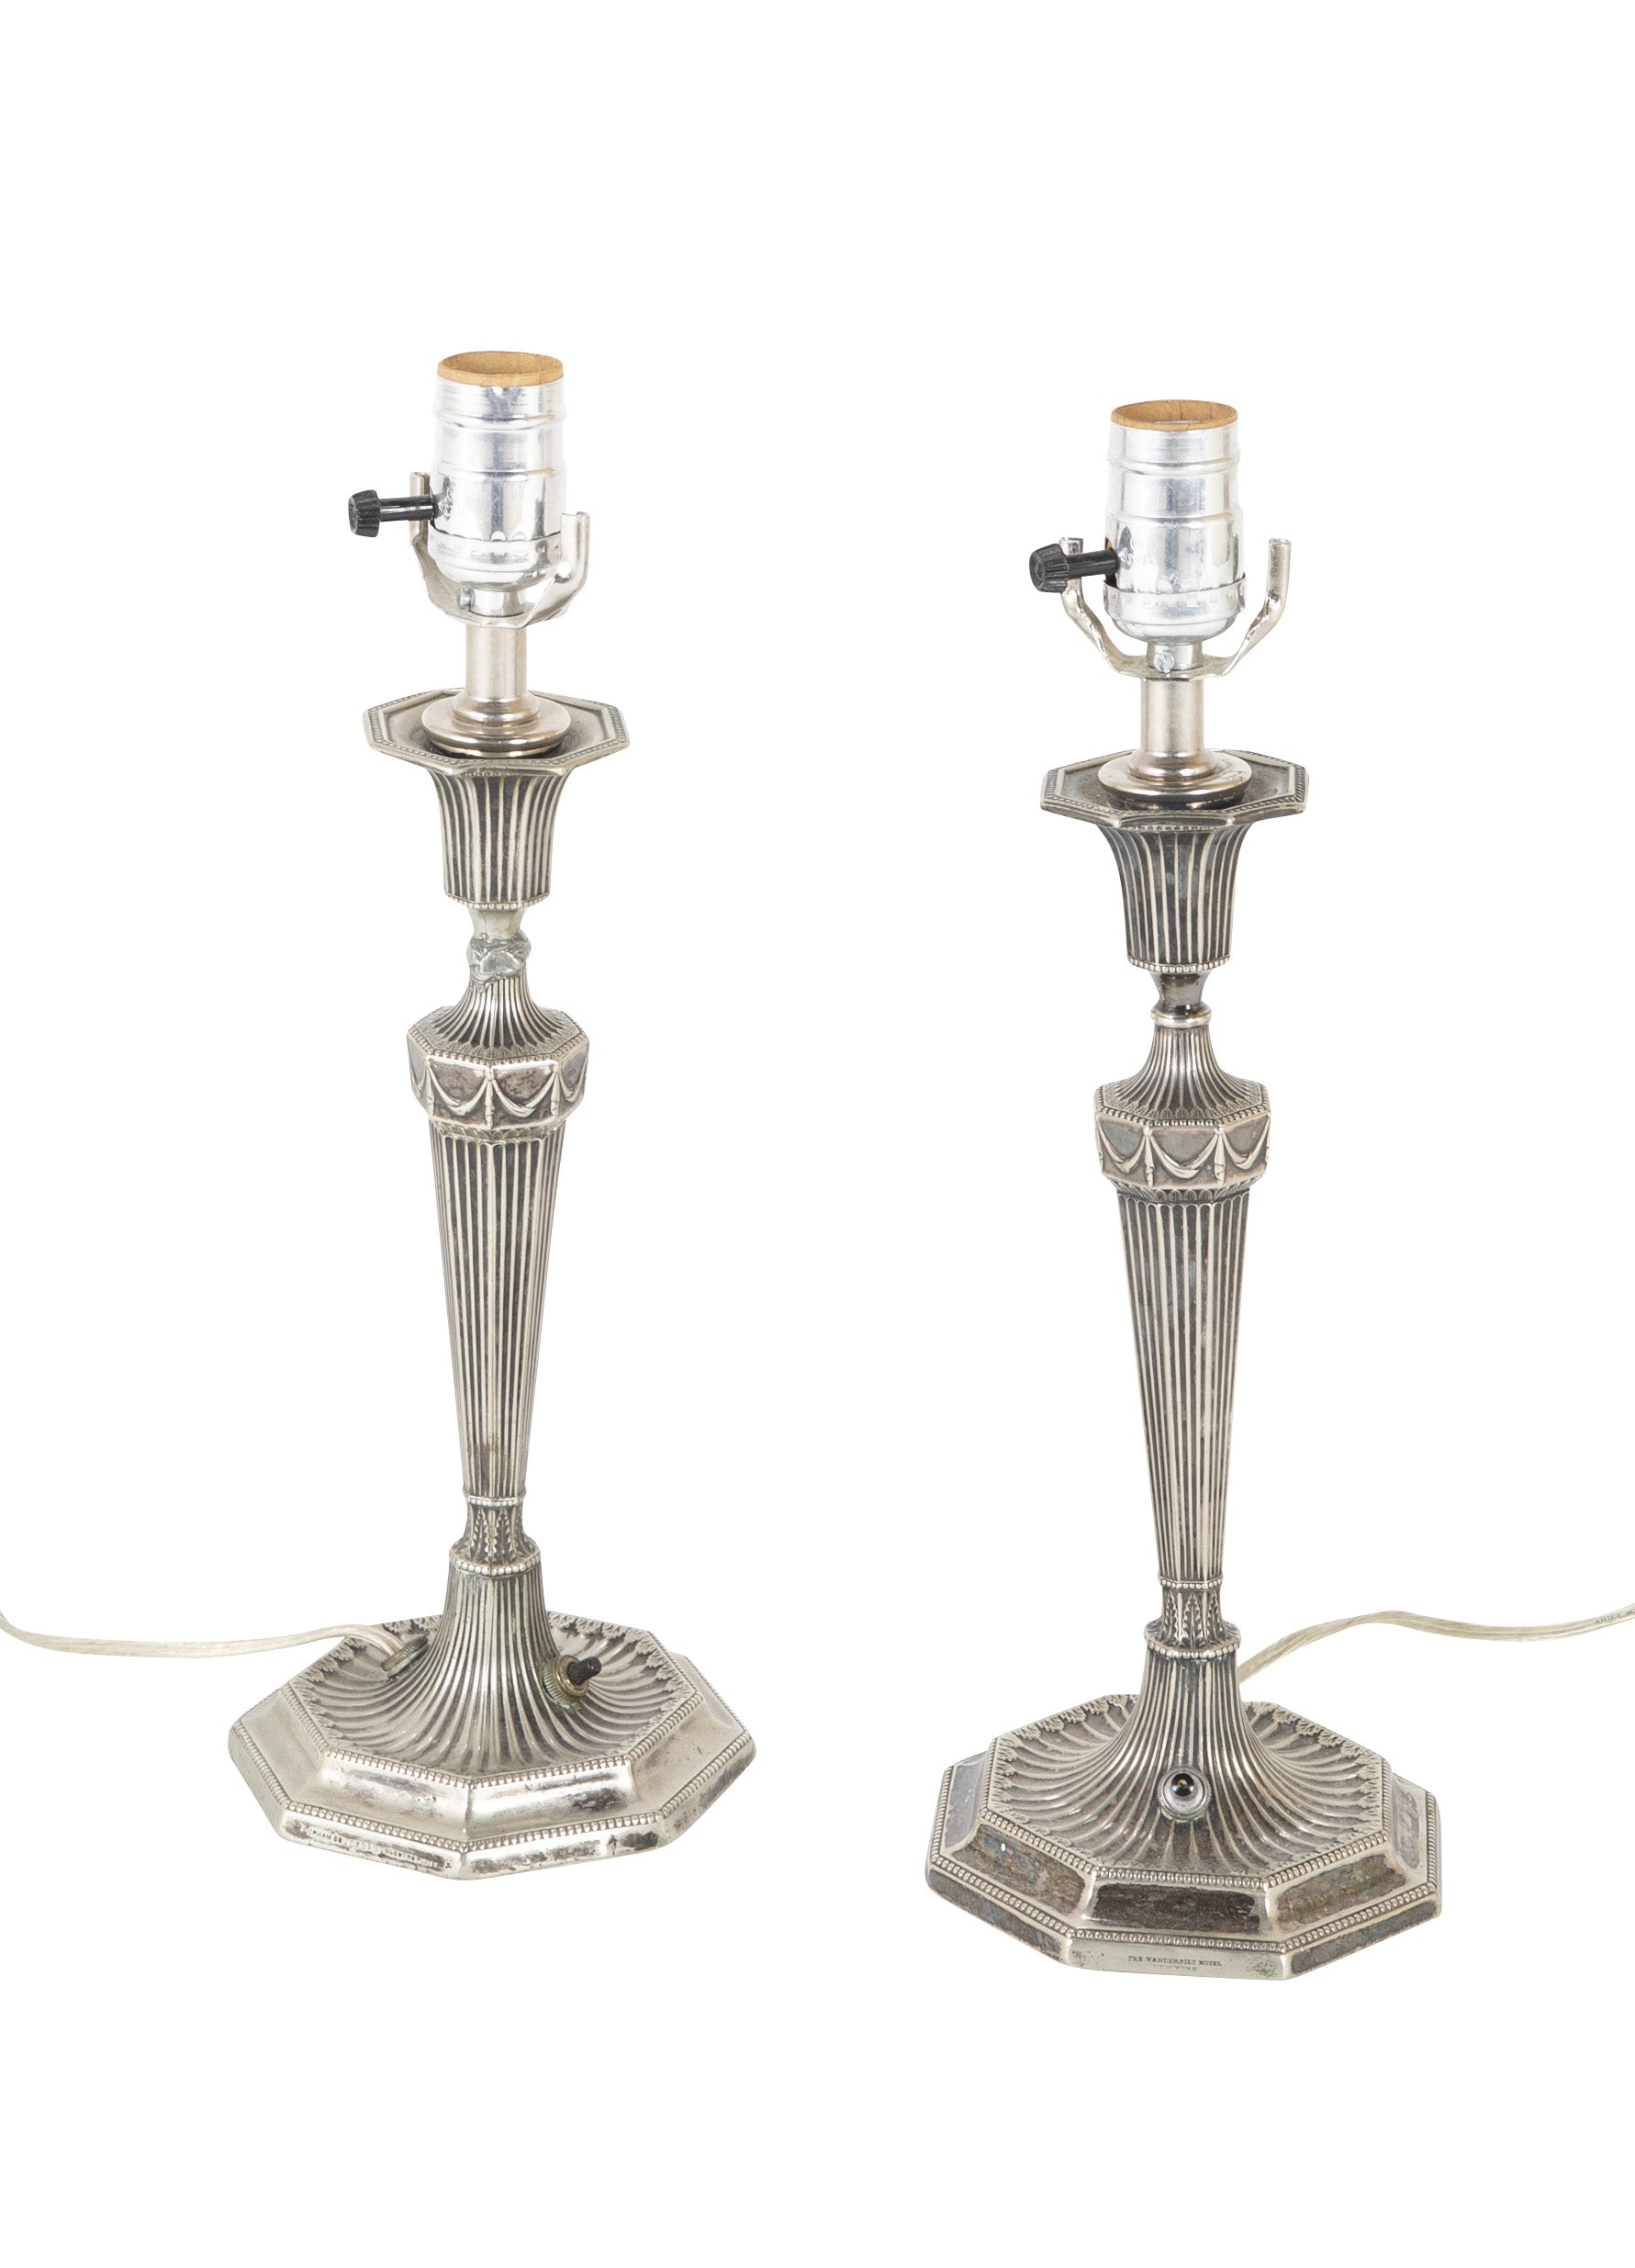 Pair of Gorham Adams Style Candlestick Lamps